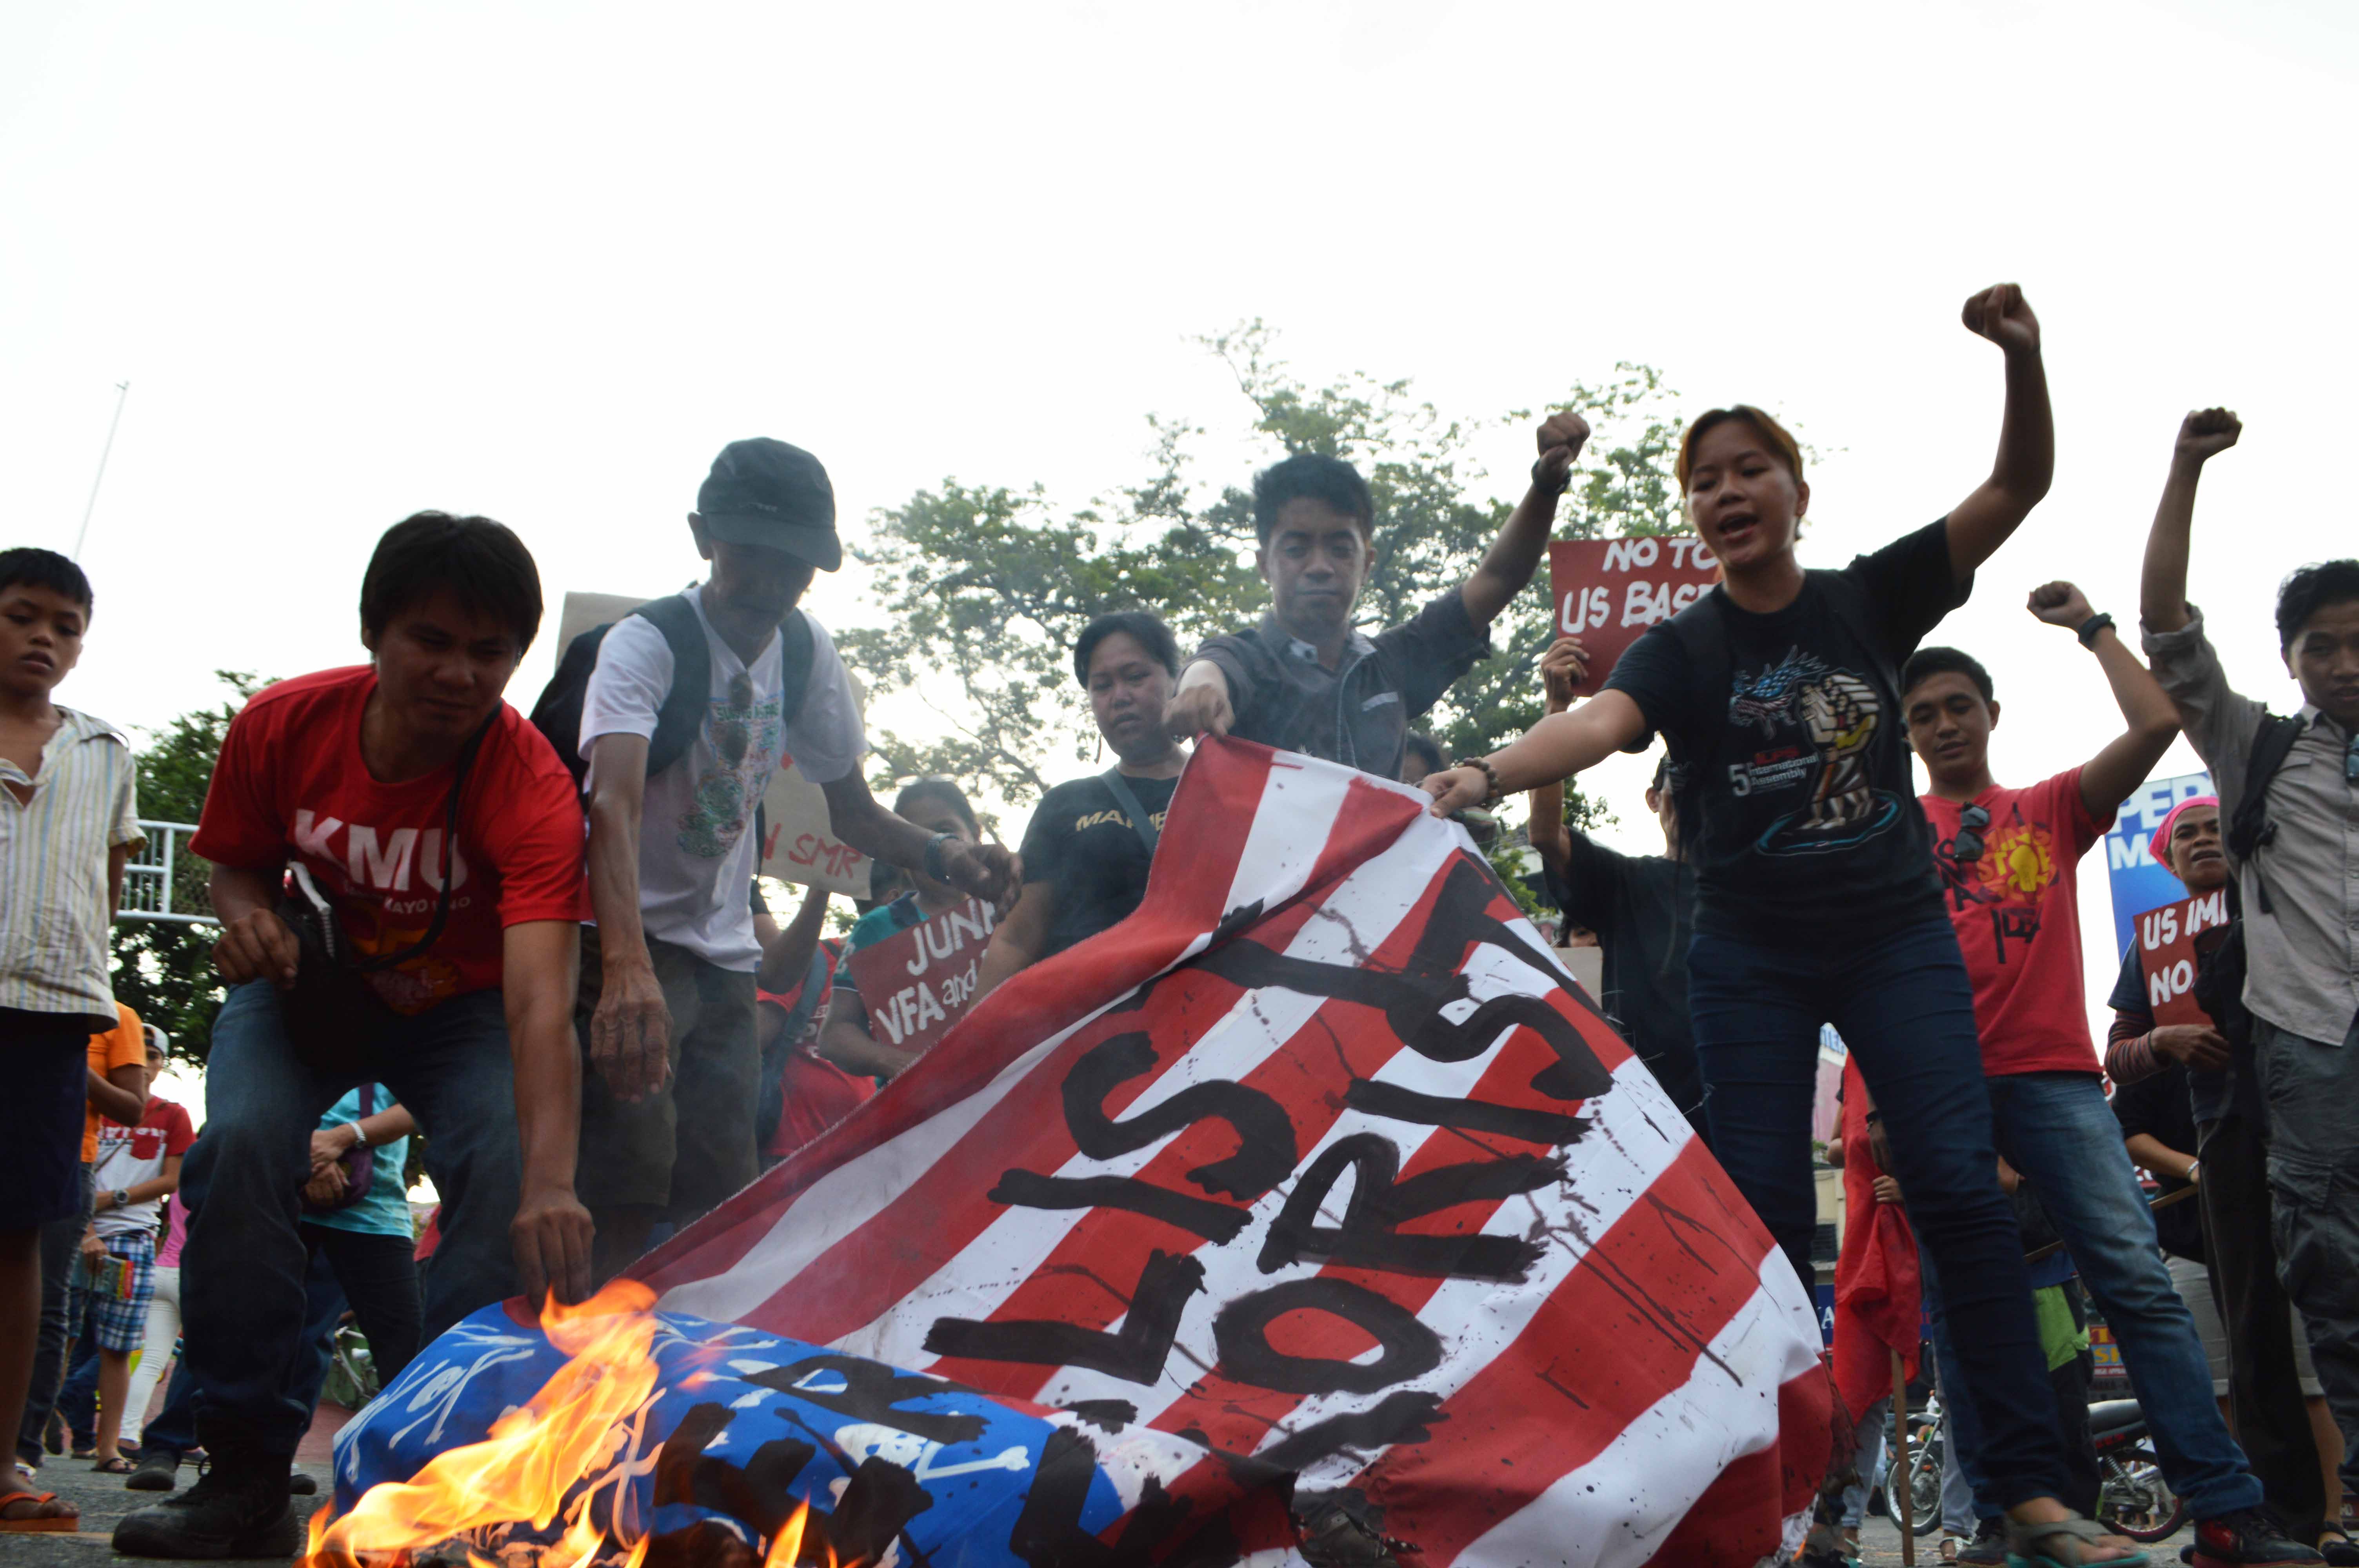 Protesters shout "US imperialist No. 1 terrorist" as they burn a US flag in a rally in Davao City on Sunday, September 11, 2016.